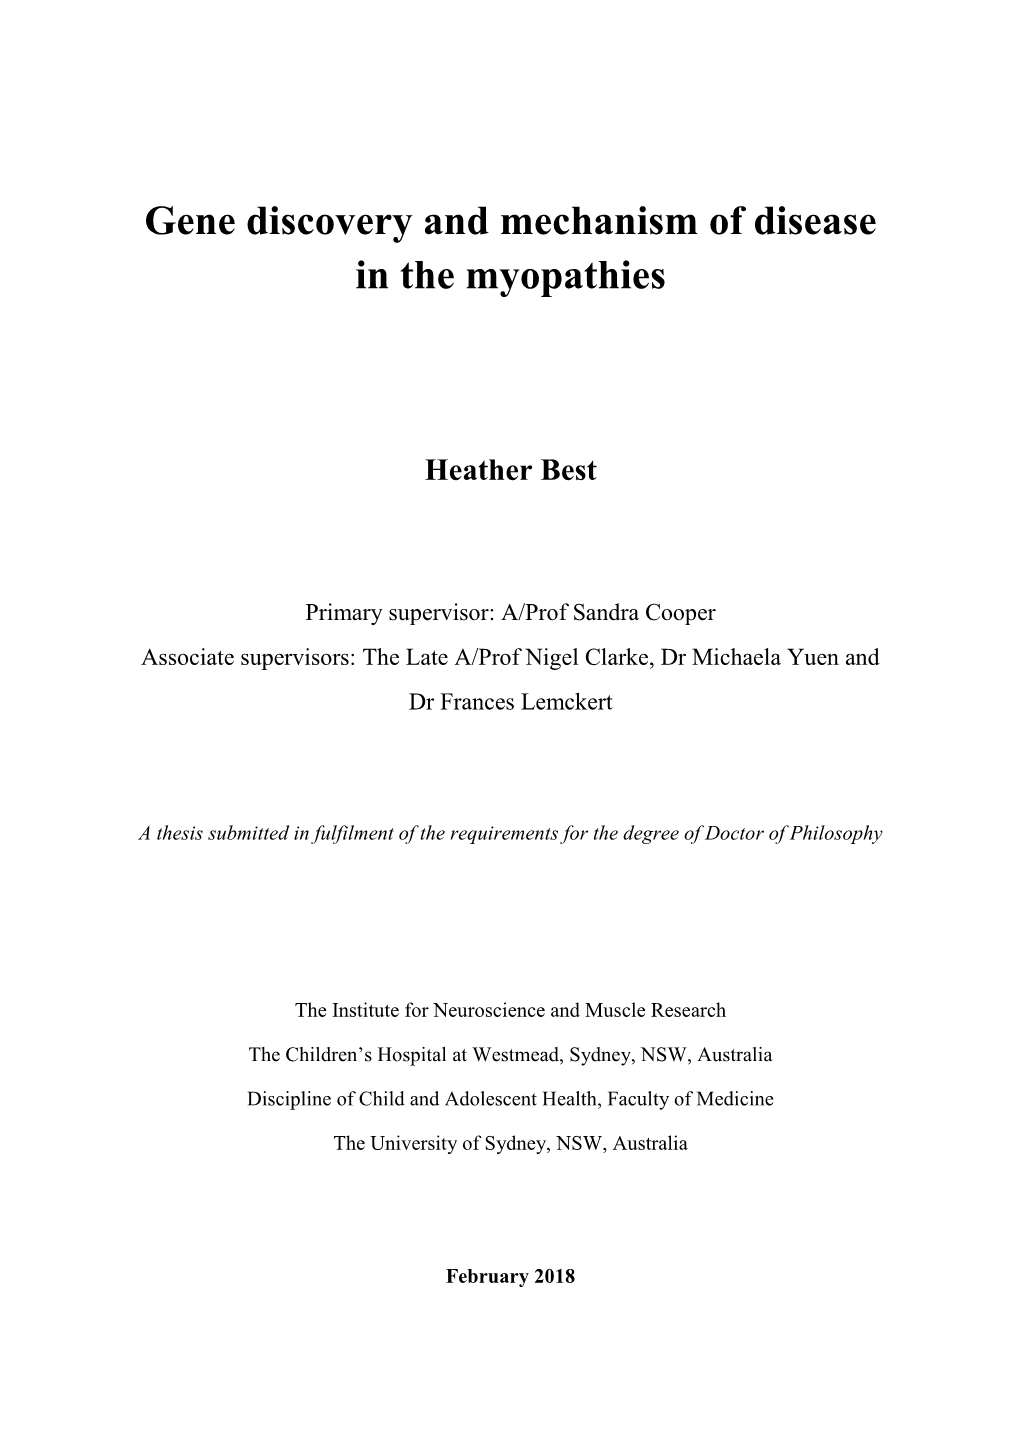 Gene Discovery and Mechanism of Disease in the Myopathies